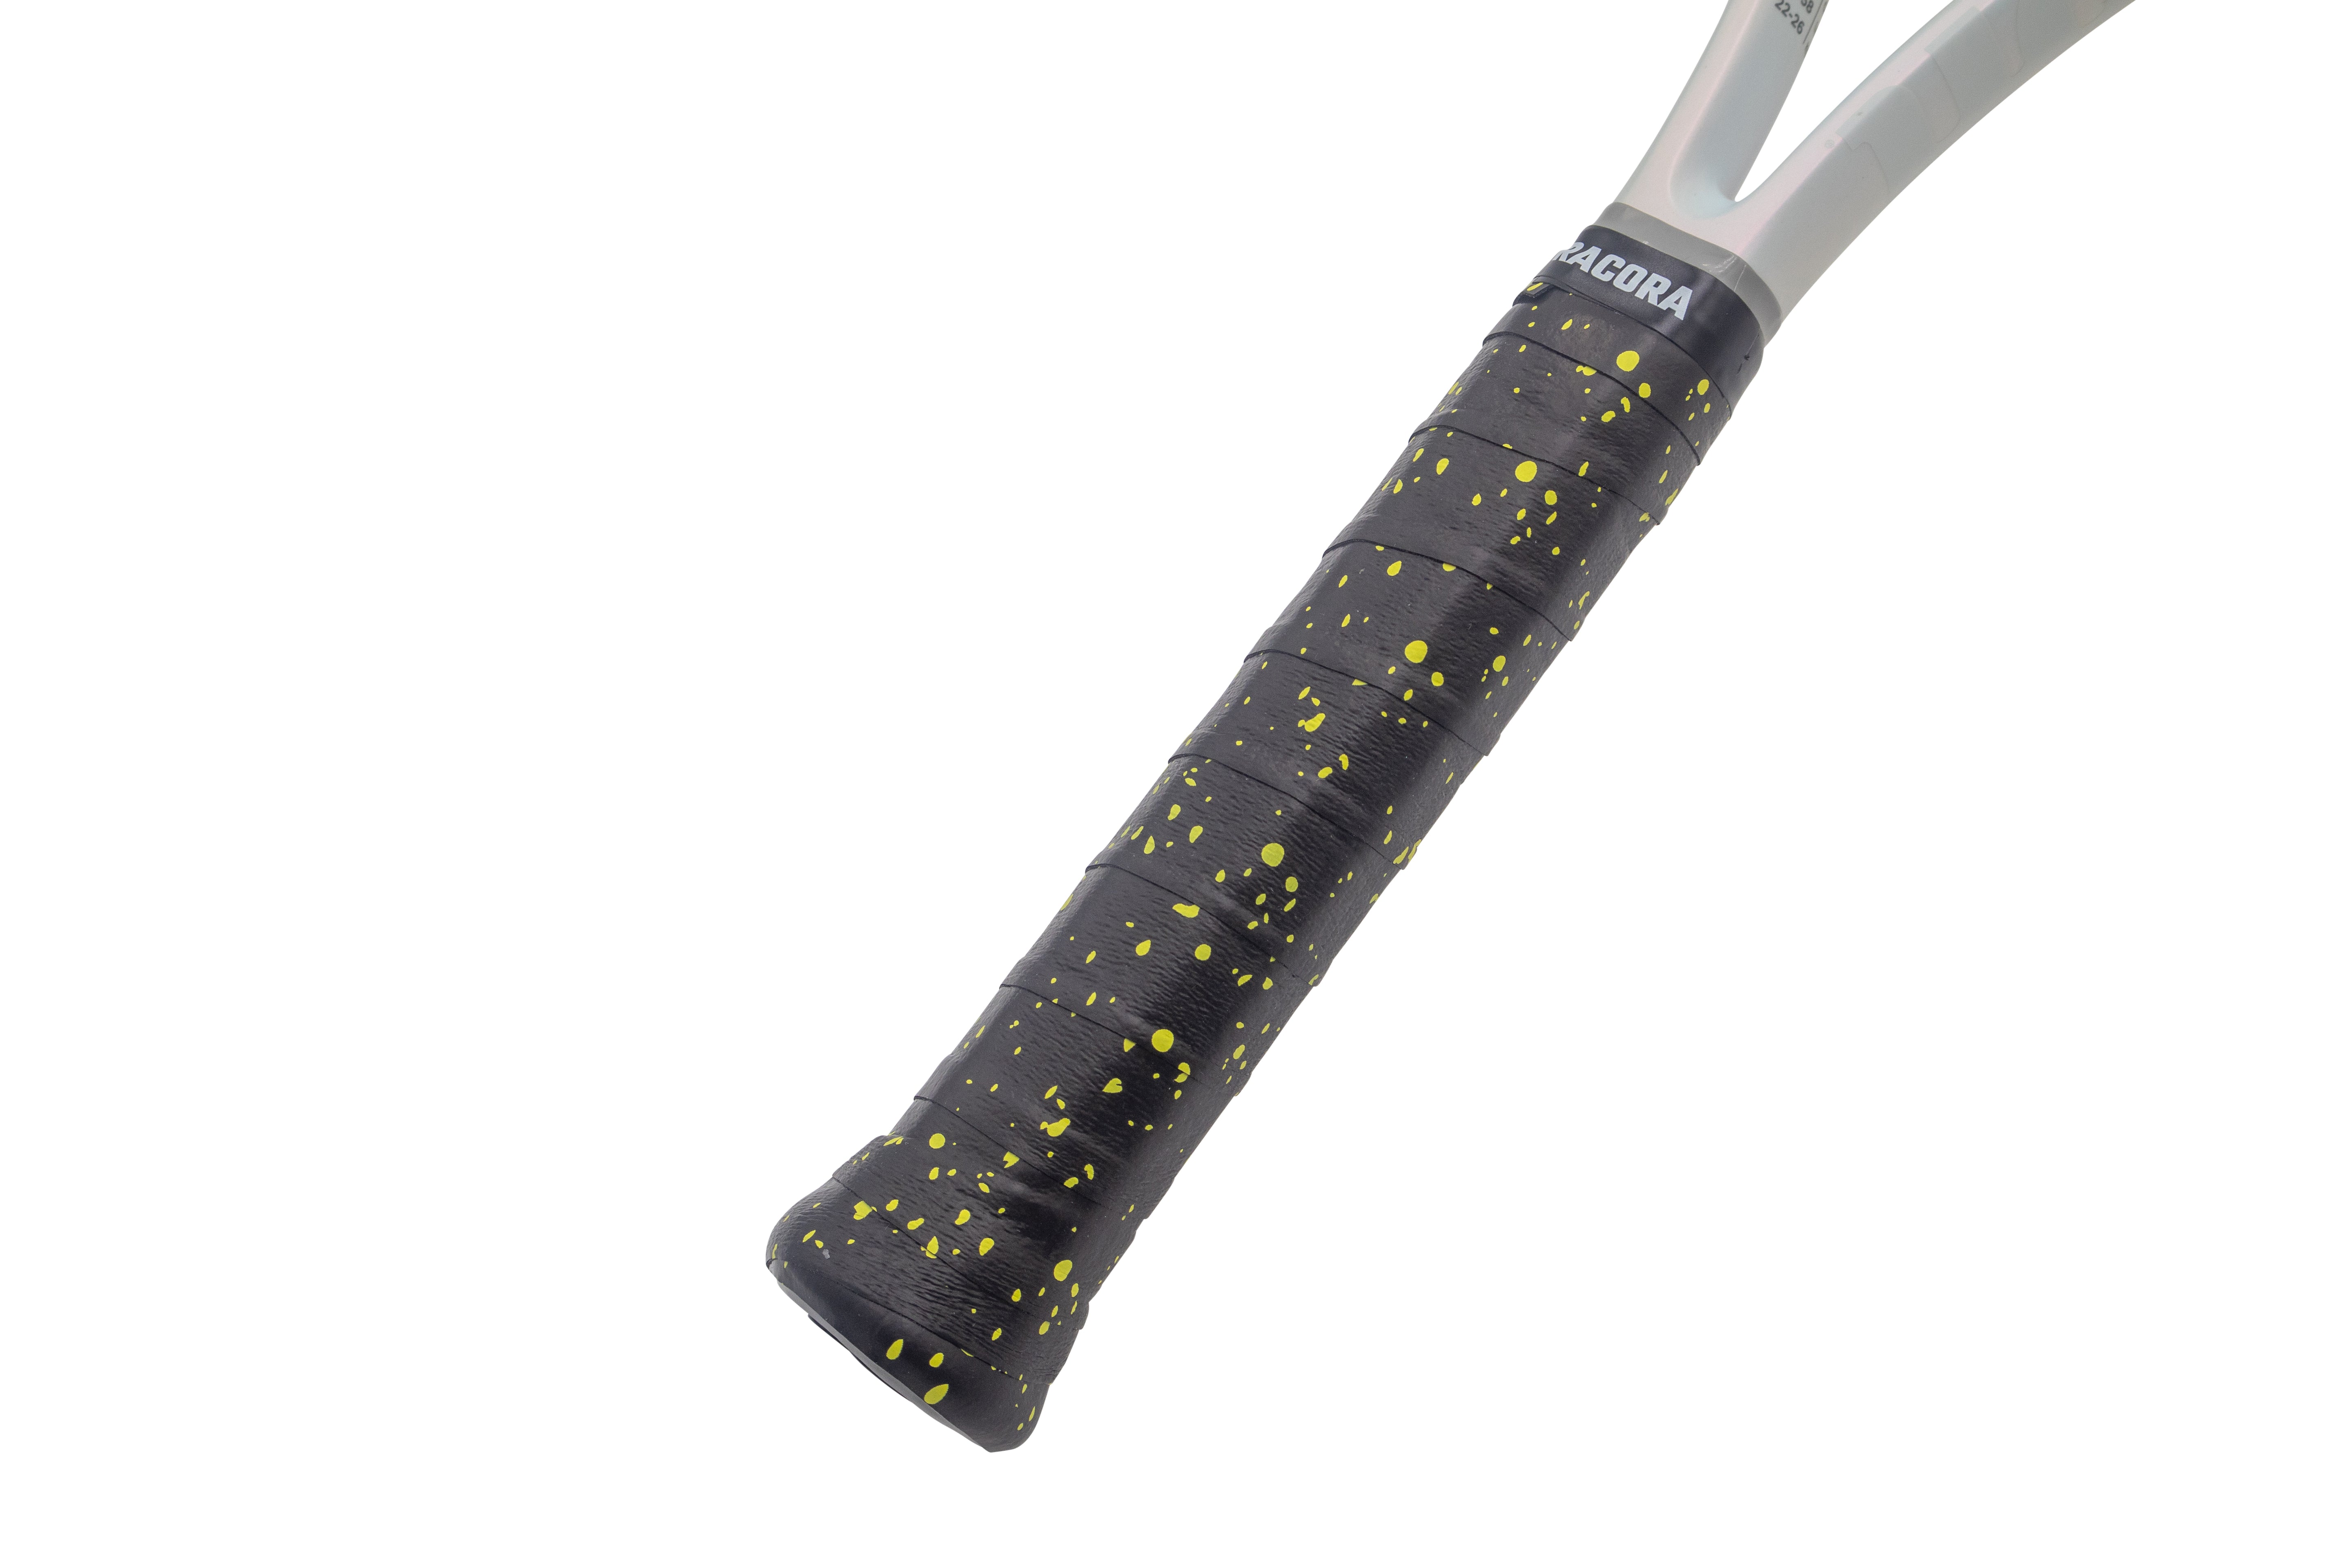 Black &amp; Gold speckled tennis overgrip on tennis racket, held at an angle